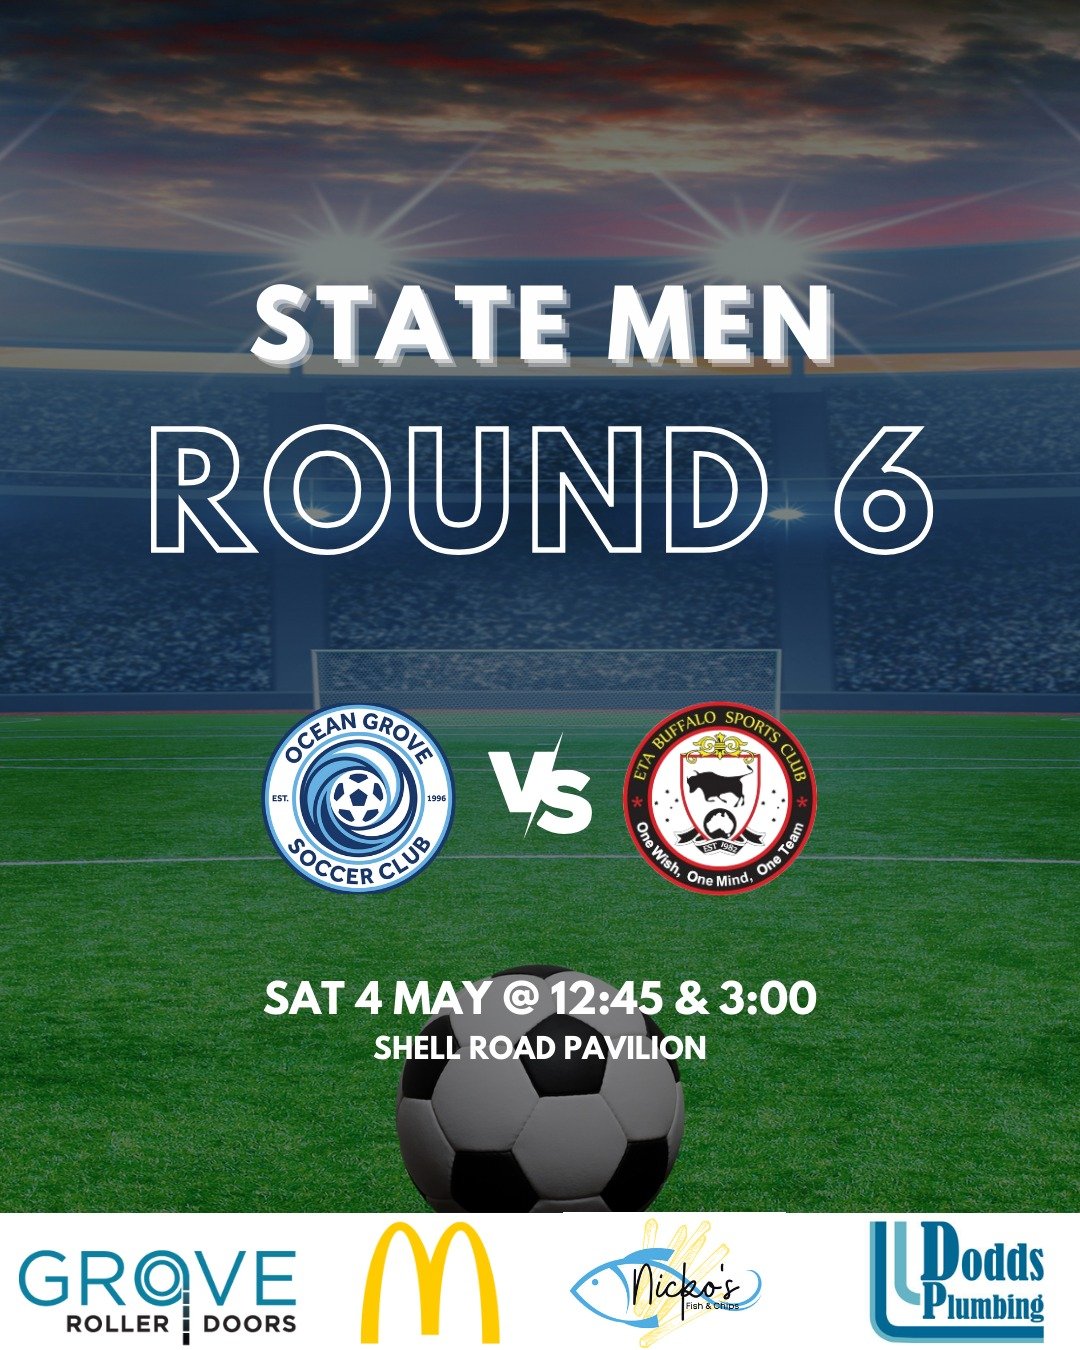 After a bye last week, our State Men are ready for two big matches at home this weekend against ETA Buffalo SC ⚽️

The Reserves kick off at 12:45, and our Senior team starts at 3:00 PM. Come down to Shell Road to show your support!